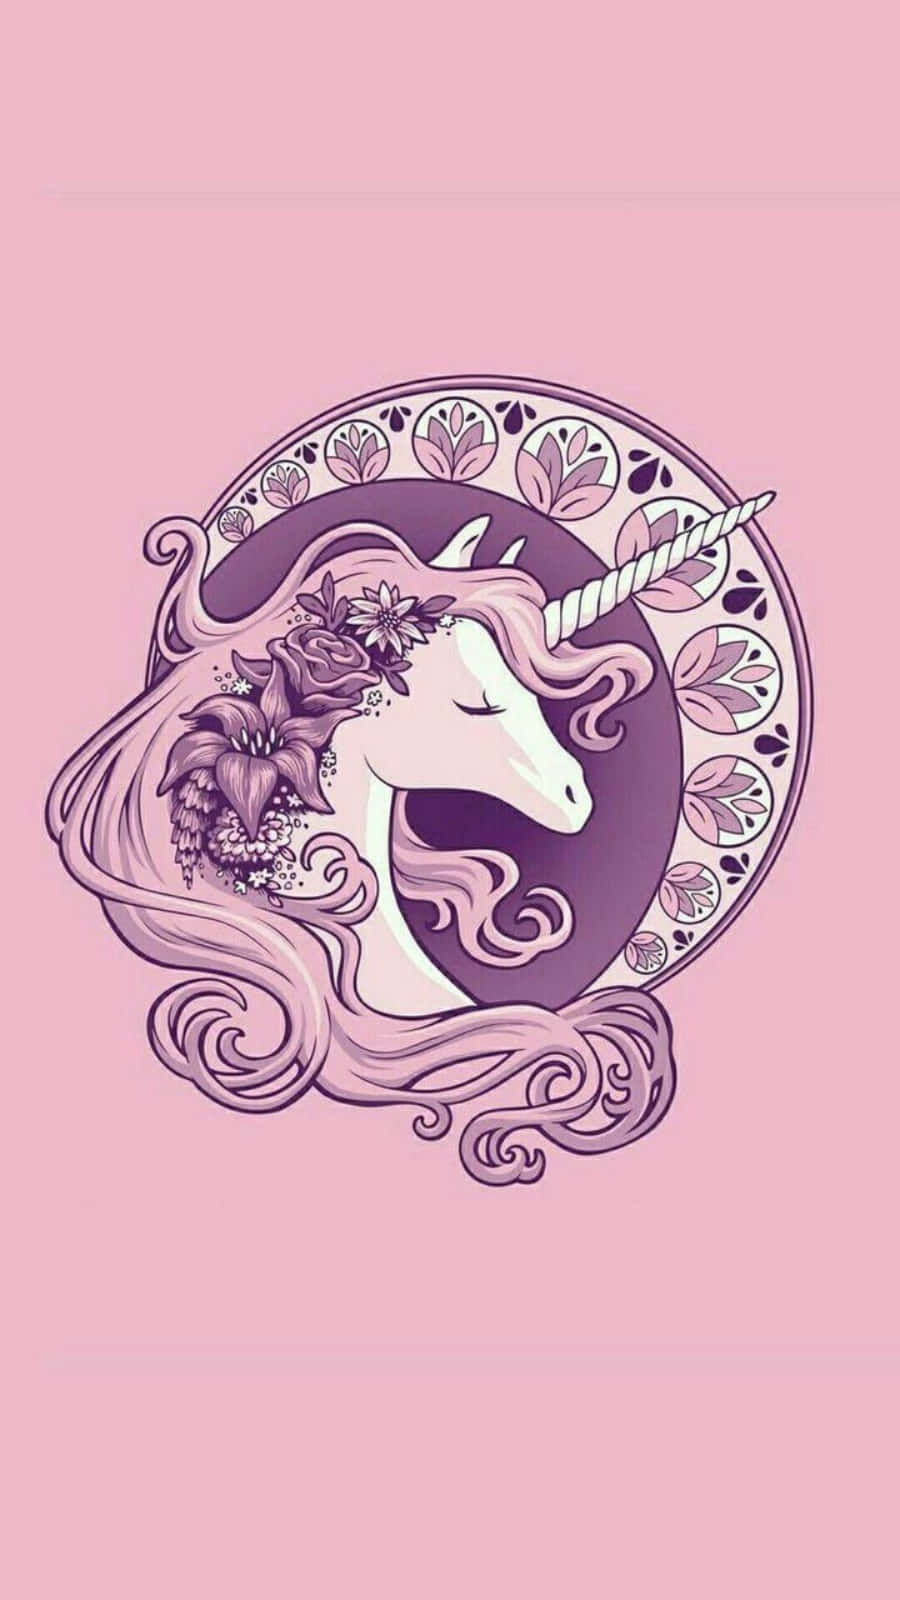 Caption: Dreamy Unicorn on an iPhone Background Wallpaper